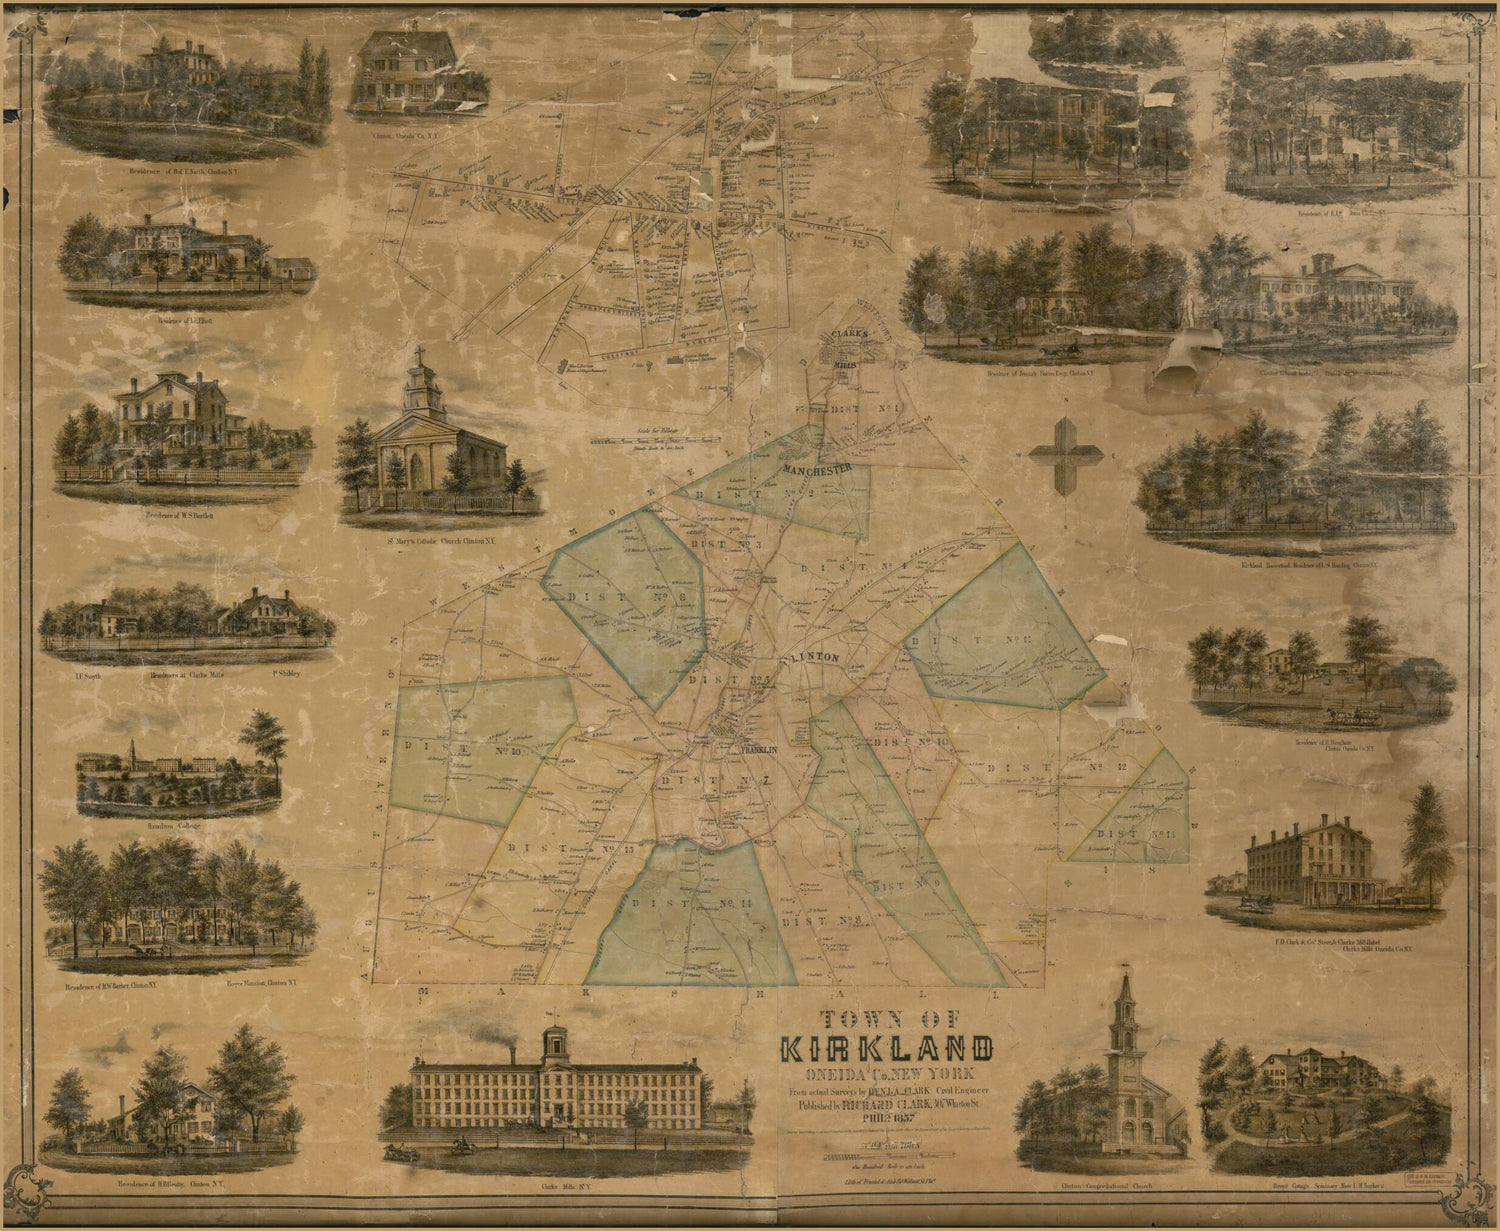 This old map of Town of Kirkland, Oneida Co., New York (Town of Kirkland, Oneida County, New York) from 1857 was created by Benjamin A. Clark,  Friend &amp; Aub in 1857